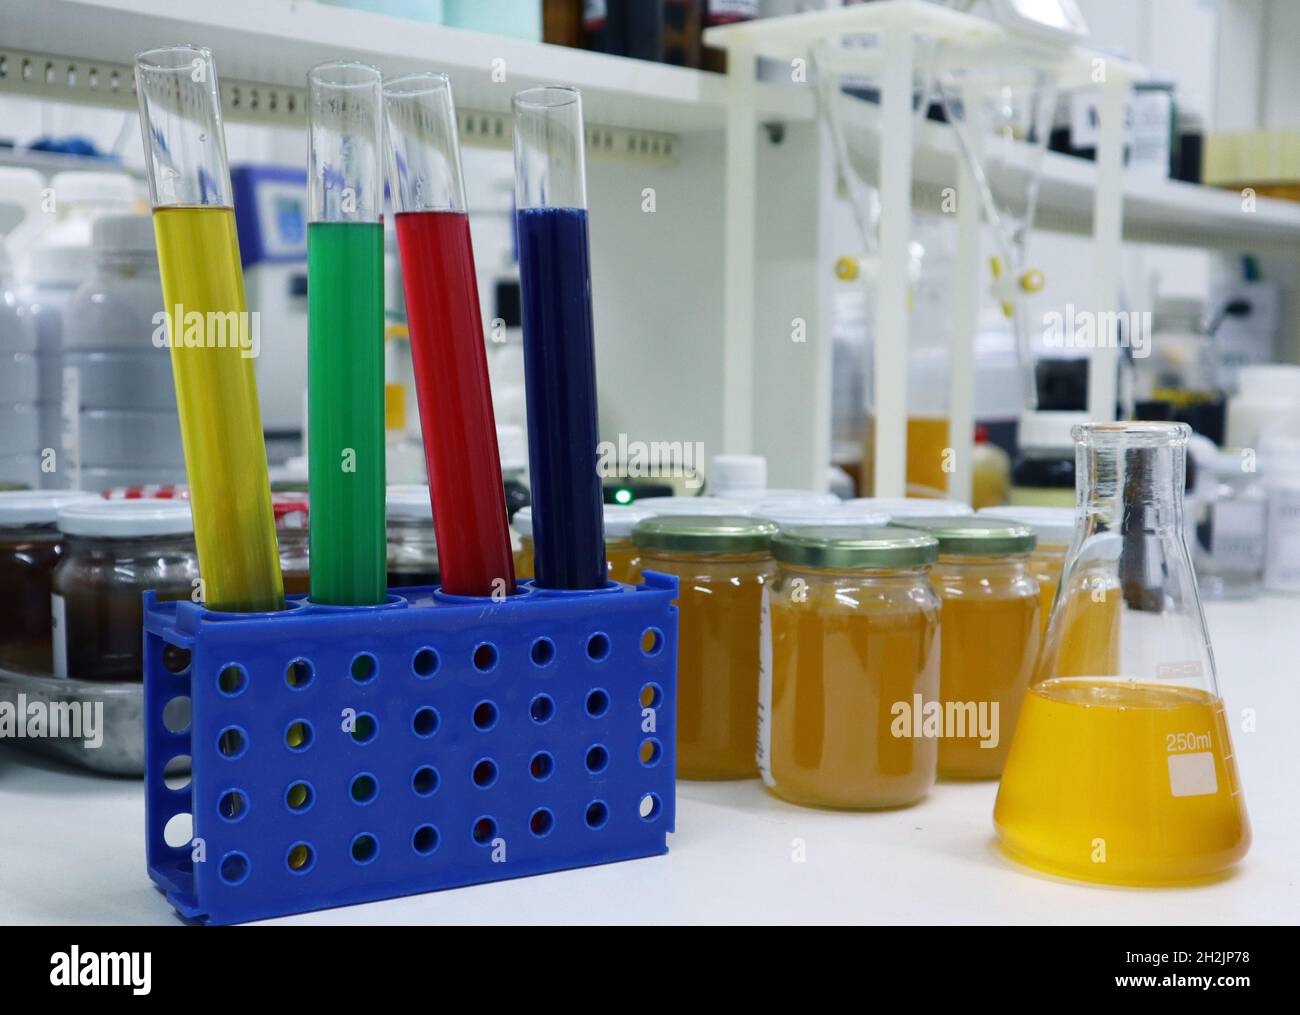 Research Laboratory with 1 bootle in a front of the image. This image represents all the efforts of the science for the better society with researches. Stock Photo